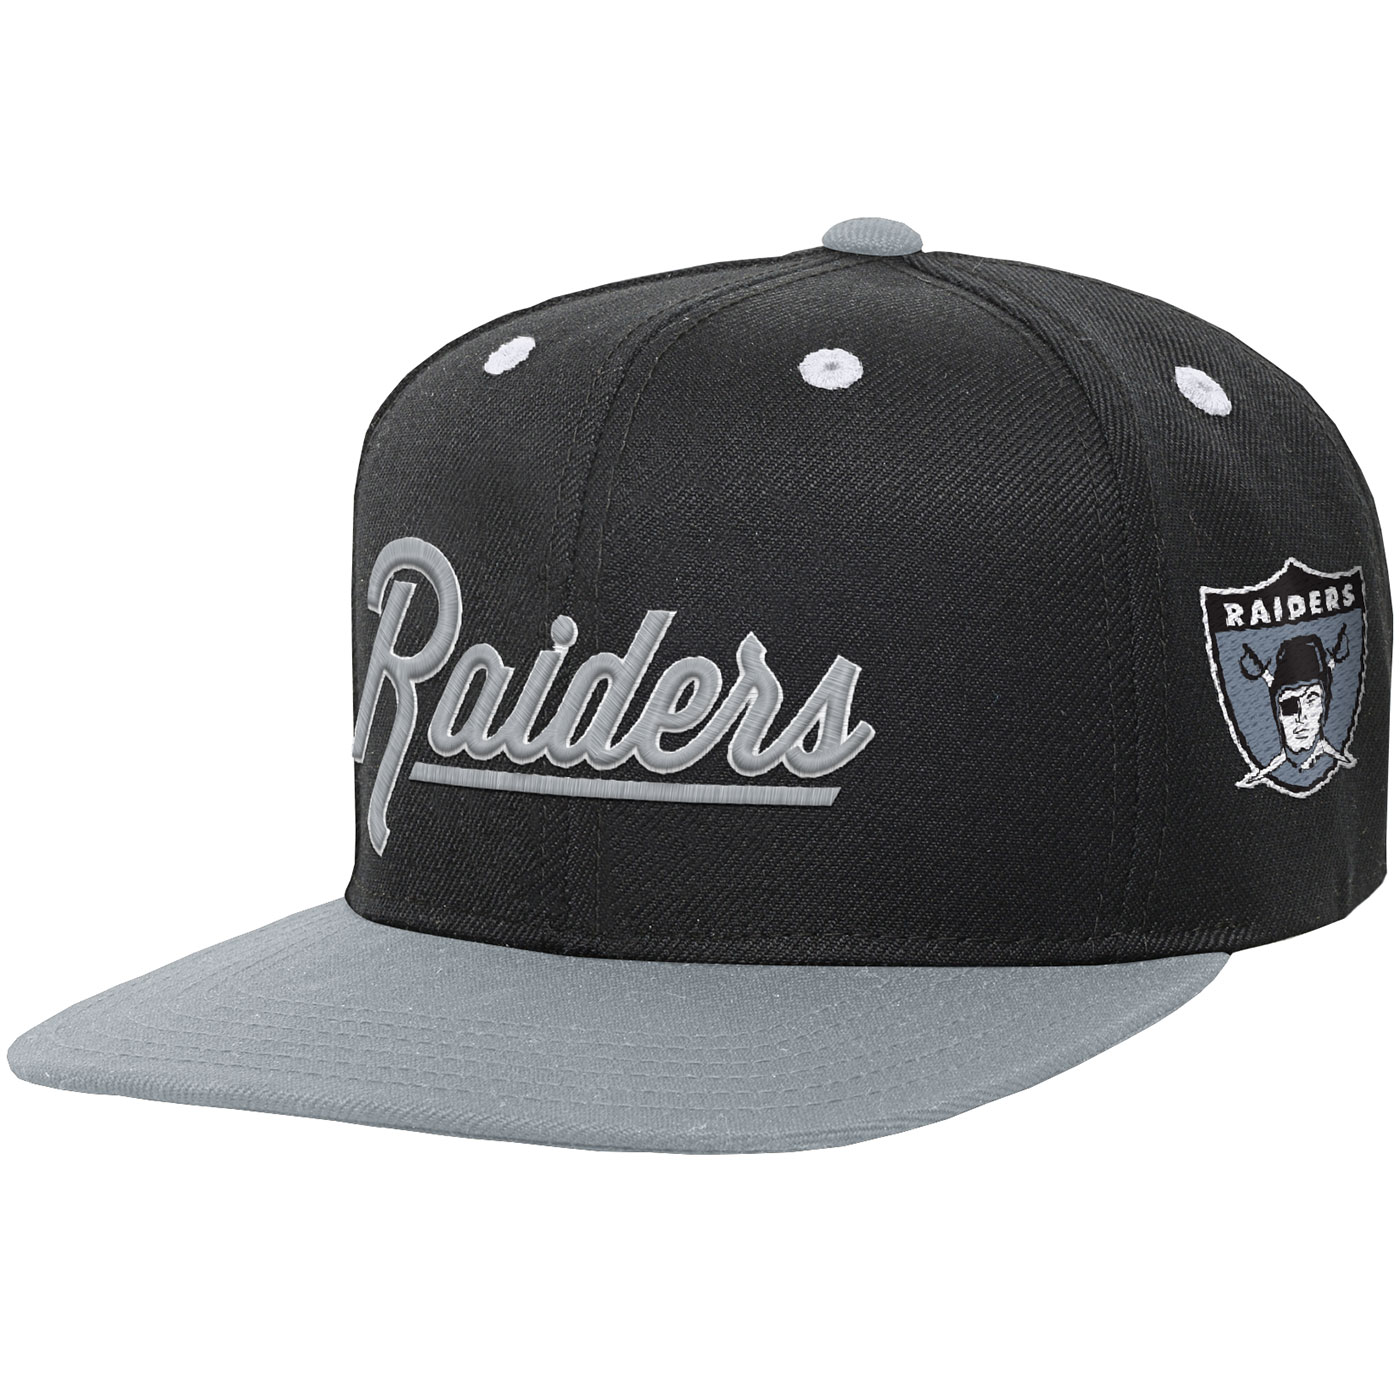 Mitchell & Ness Caps: The Best Throwbacks Ever Made?